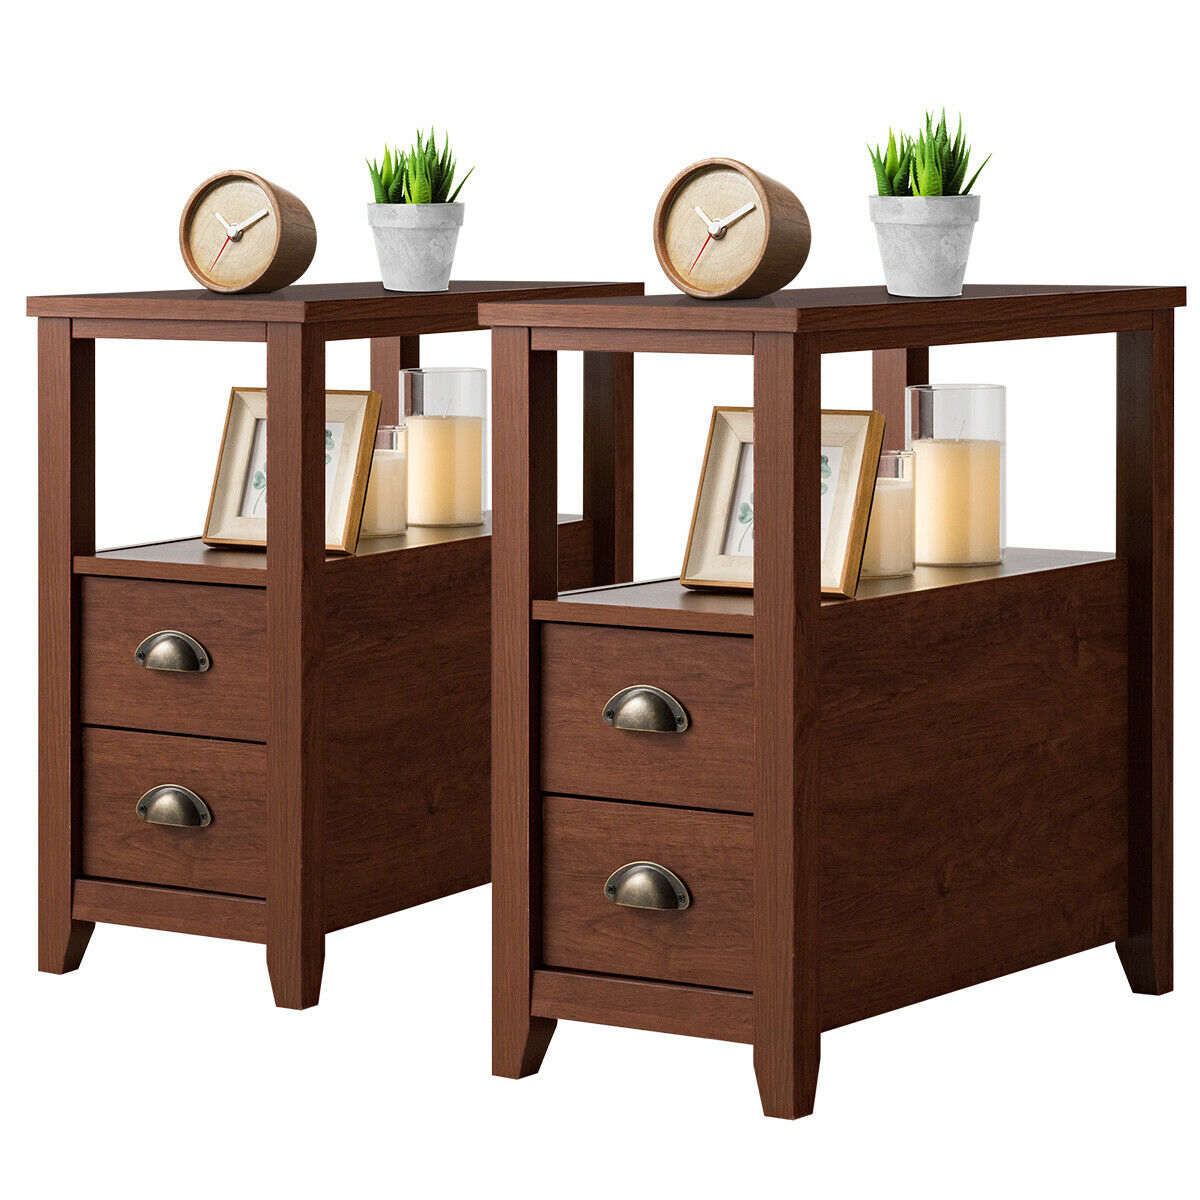 Set Of 2 Nightstand Rustic Style End Table W/Drawer Shelf Brown